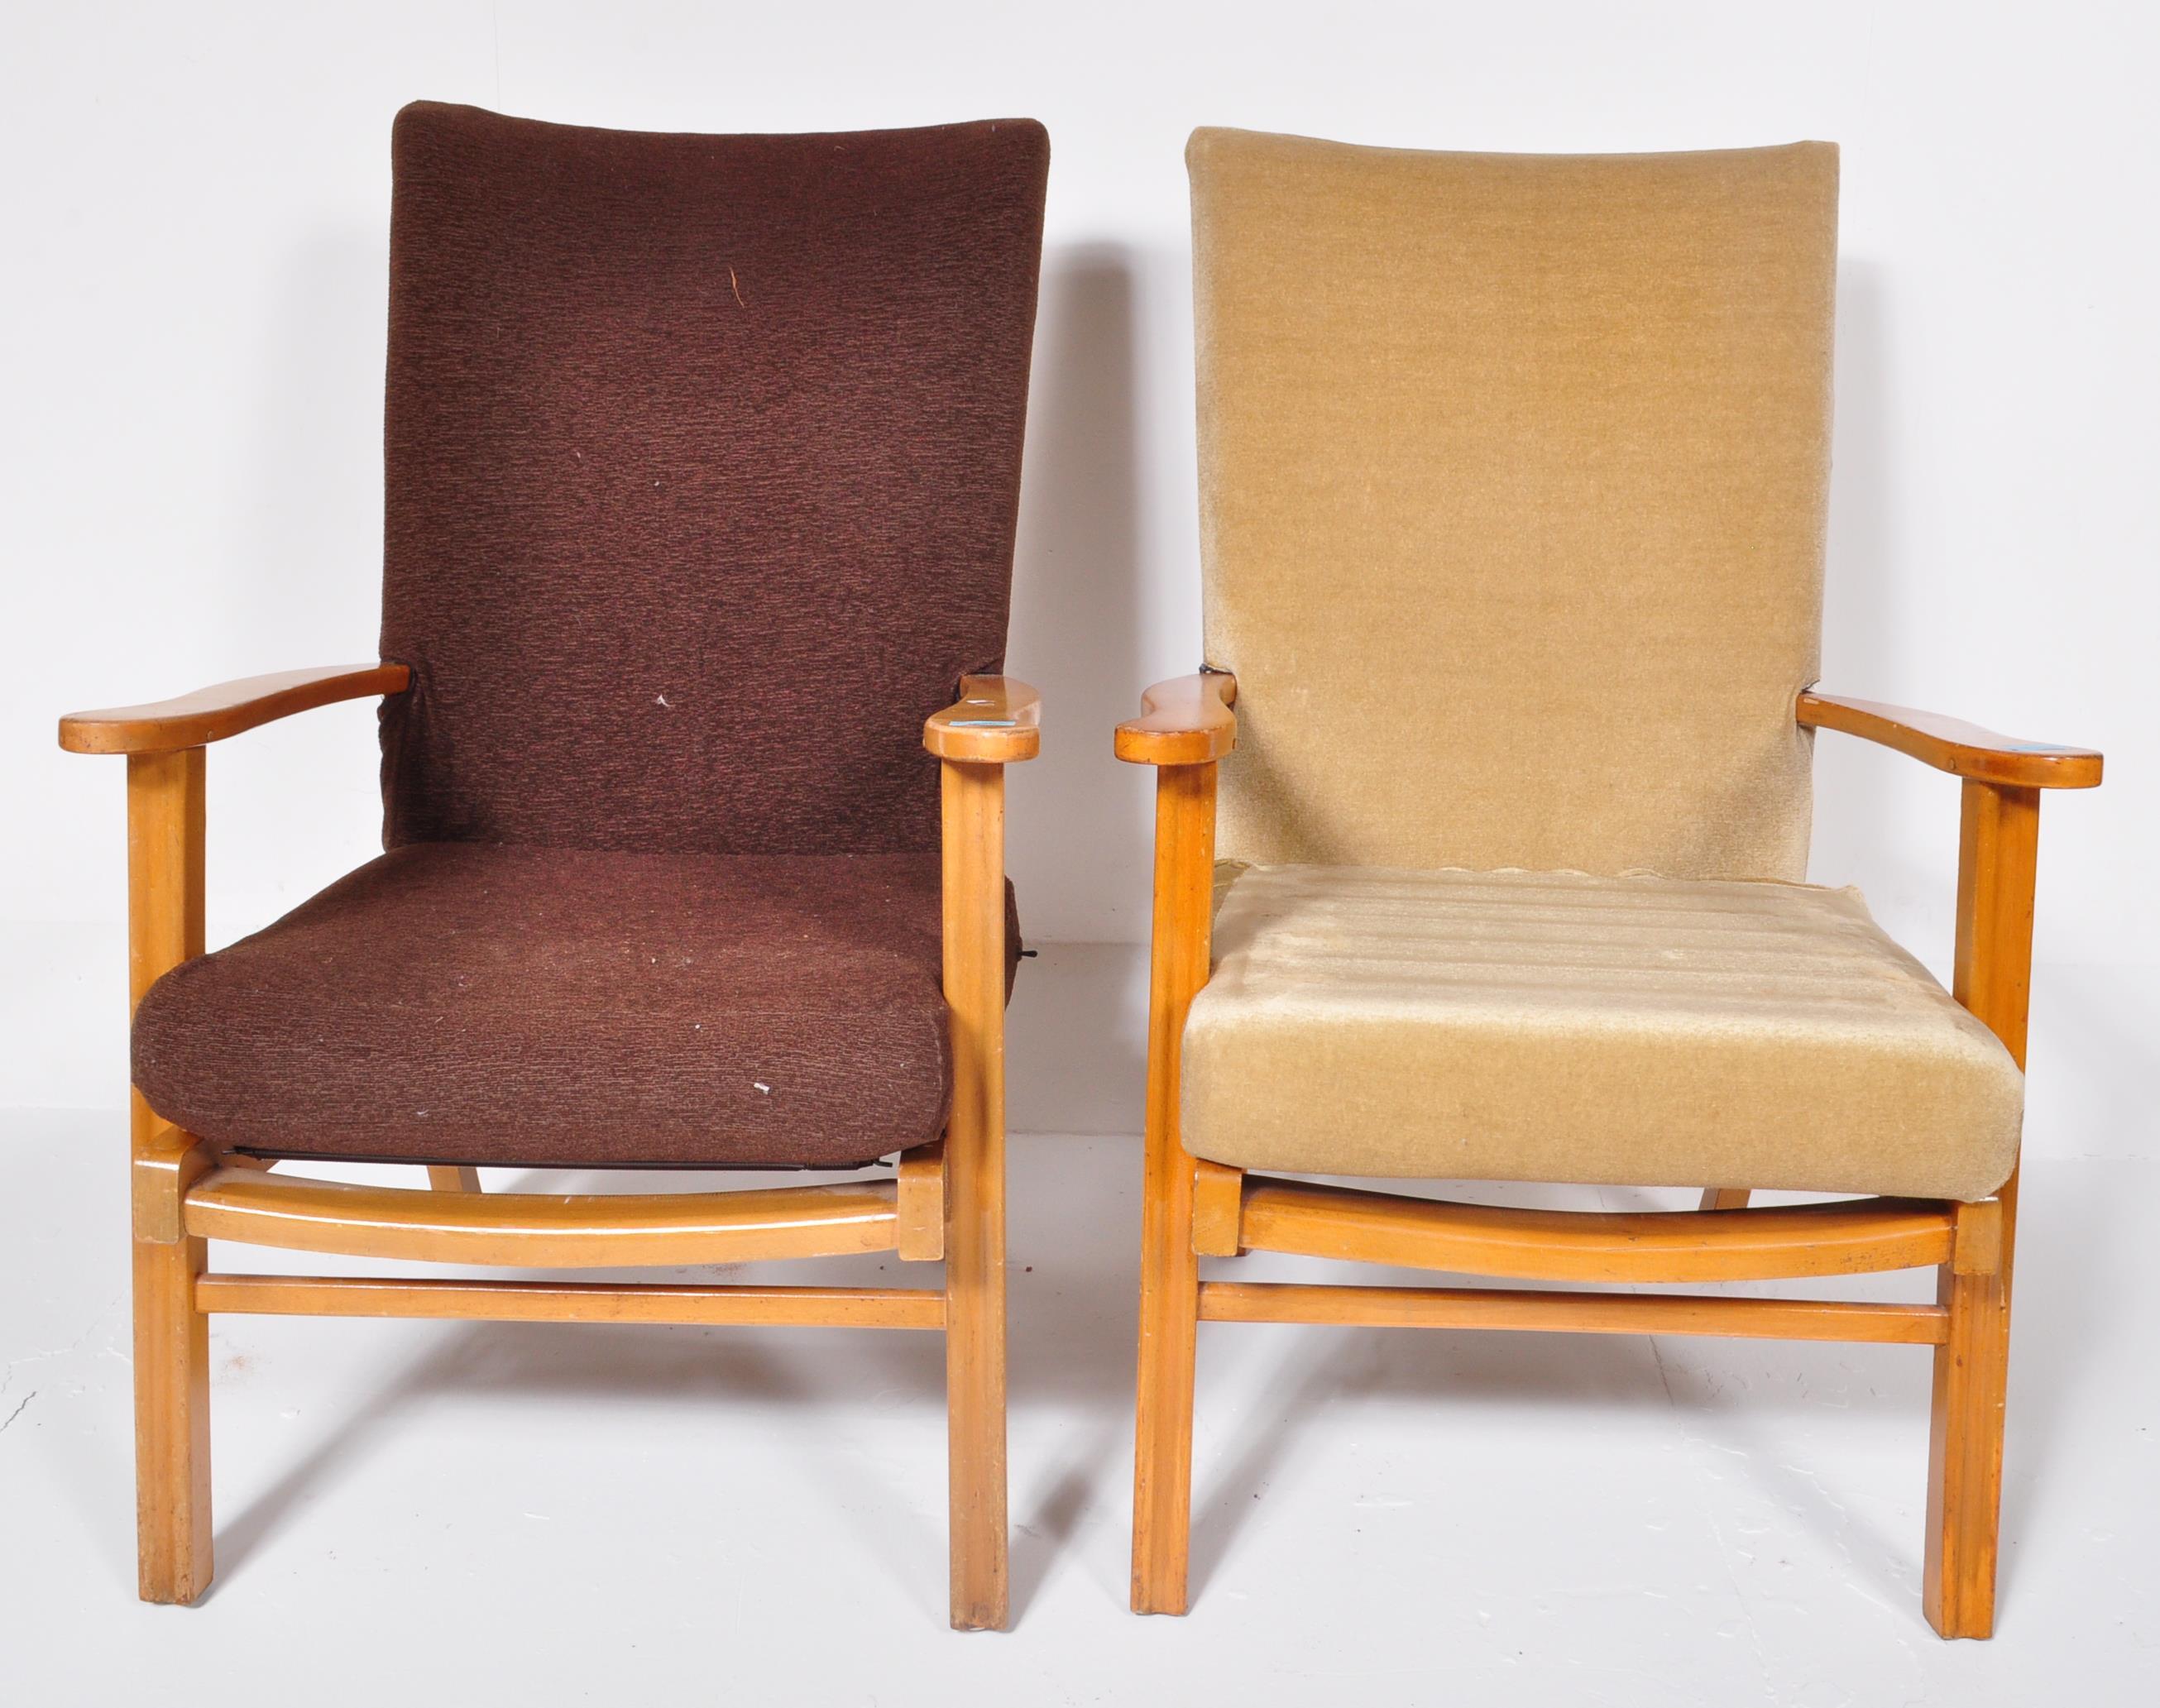 TWO VINTAGE MID CENTURY TEAK LOUNGE ARM CHAIRS - Image 2 of 8